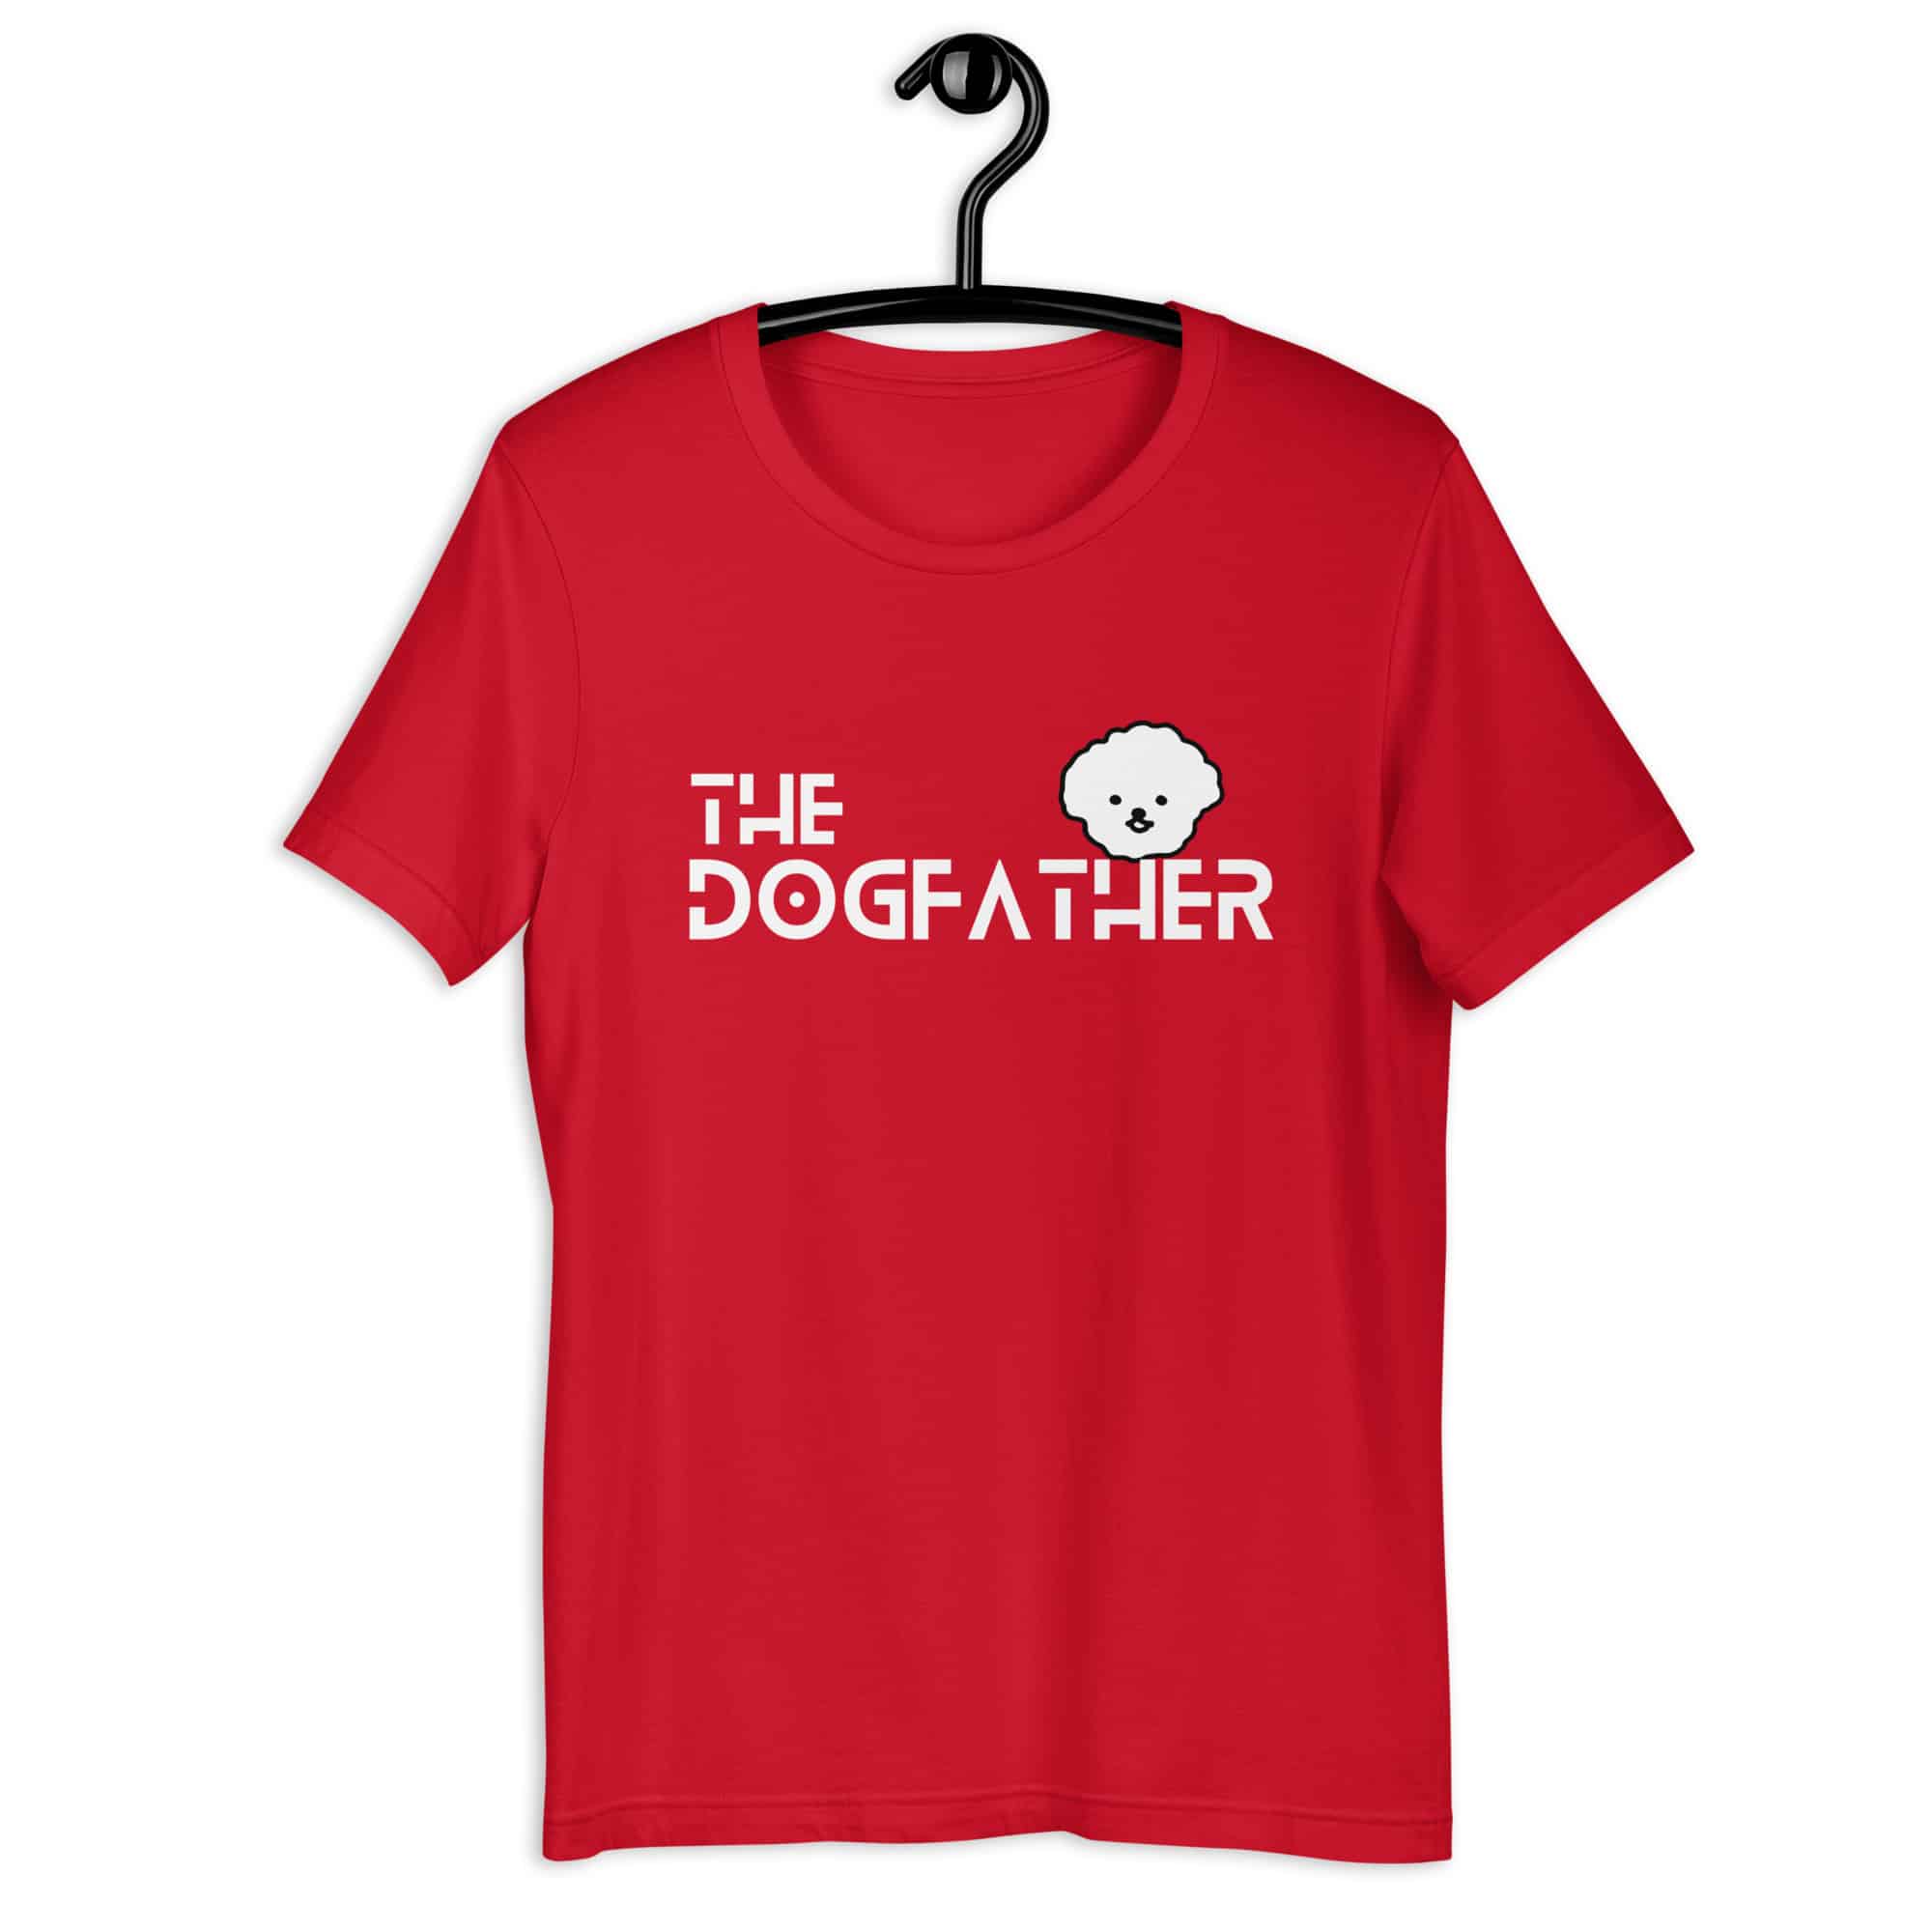 The Dogfather Poodles Unisex T-Shirt. Red